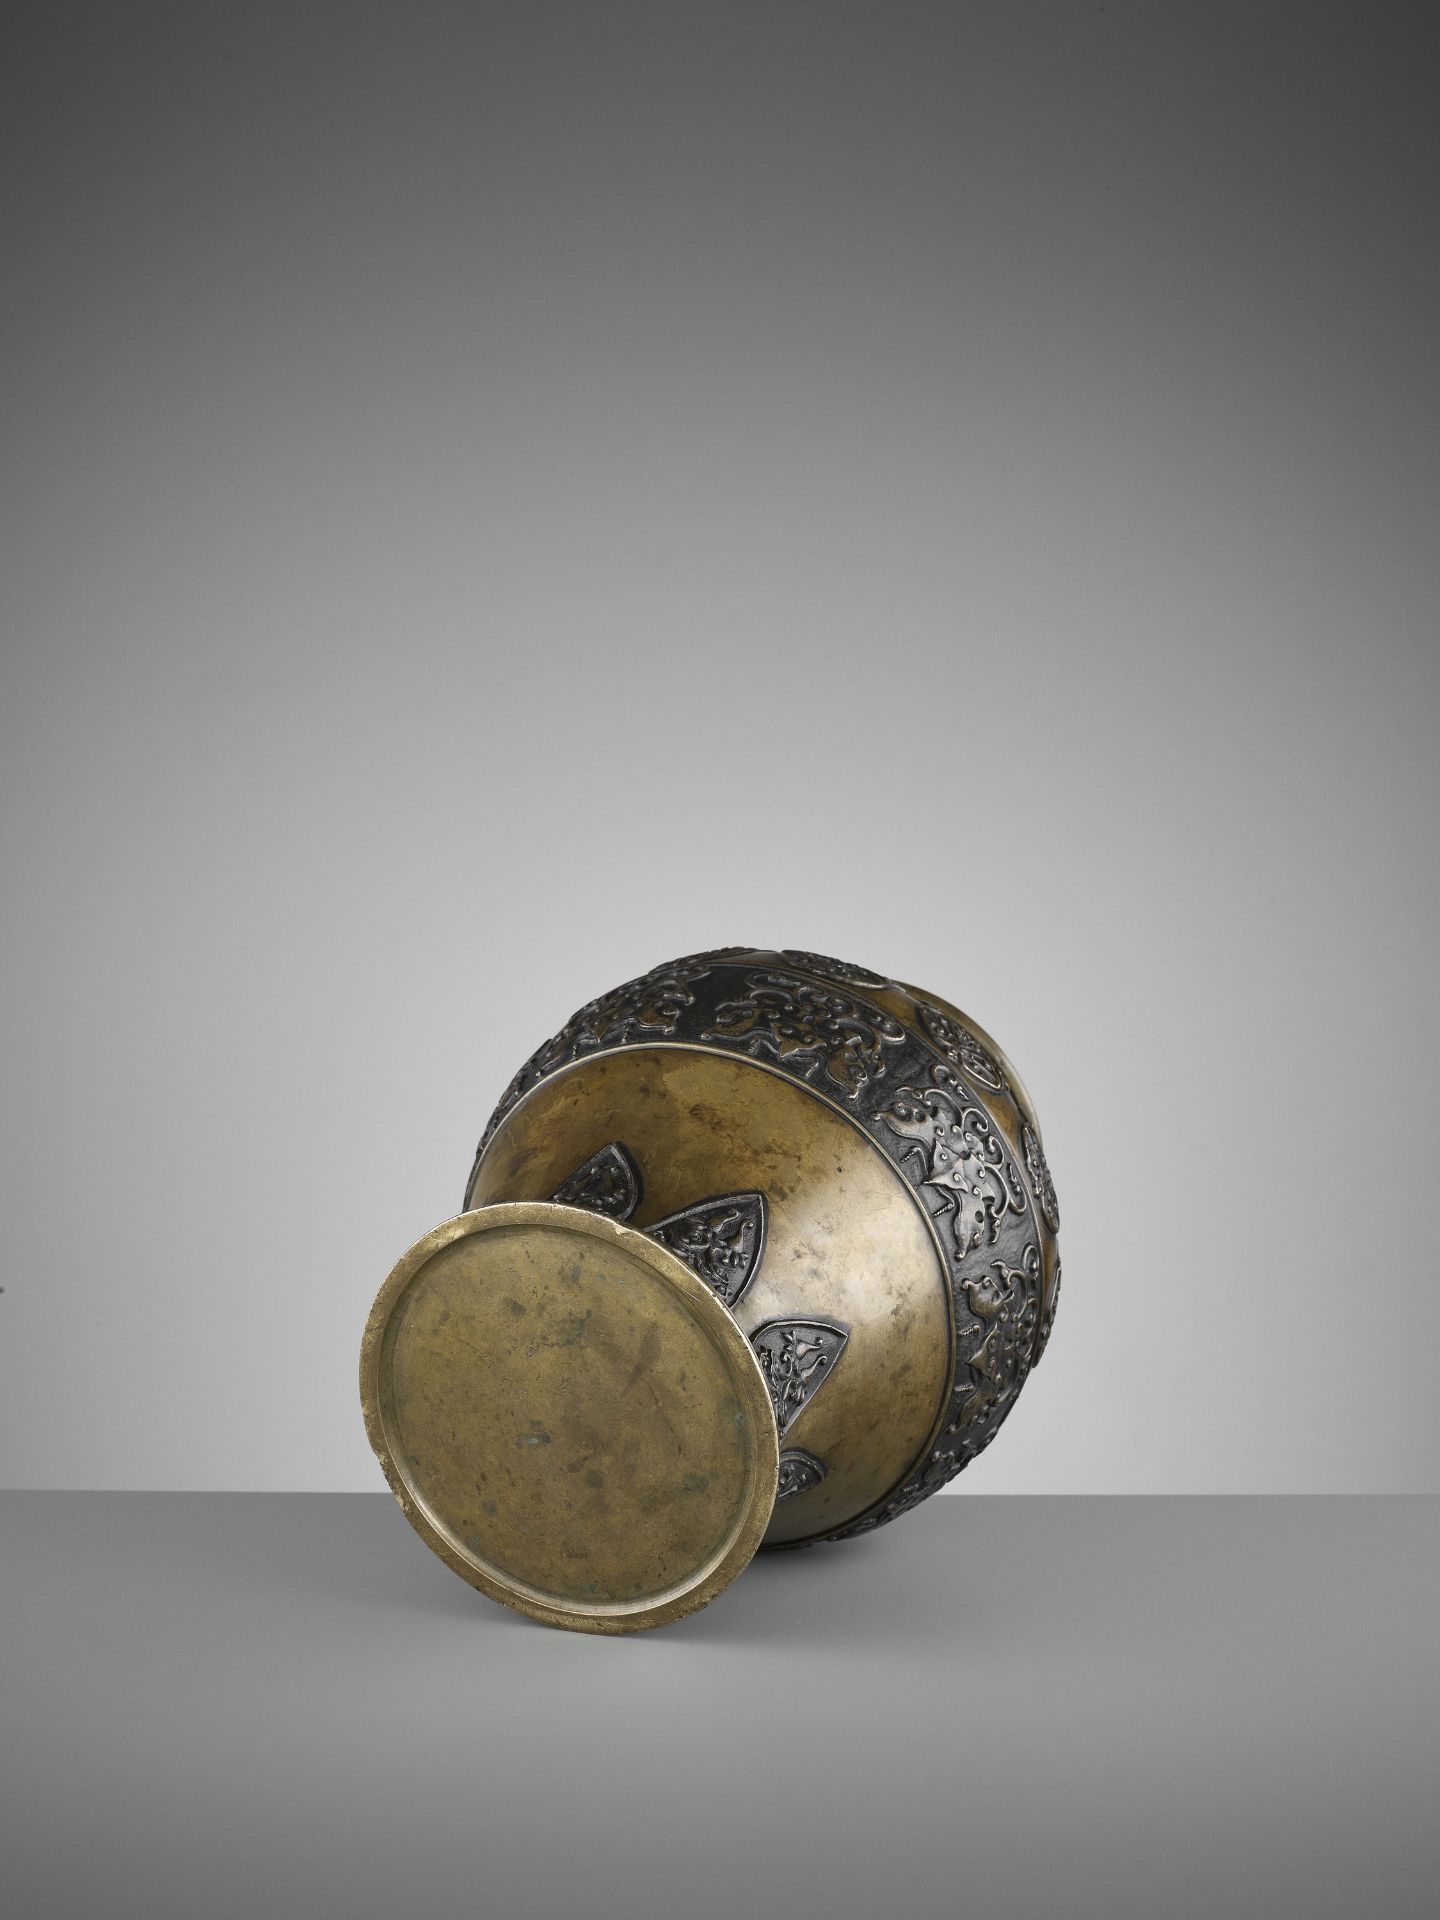 AN ARCHAISTIC BRONZE BALUSTER VASE, 17TH CENTURY - Image 8 of 8